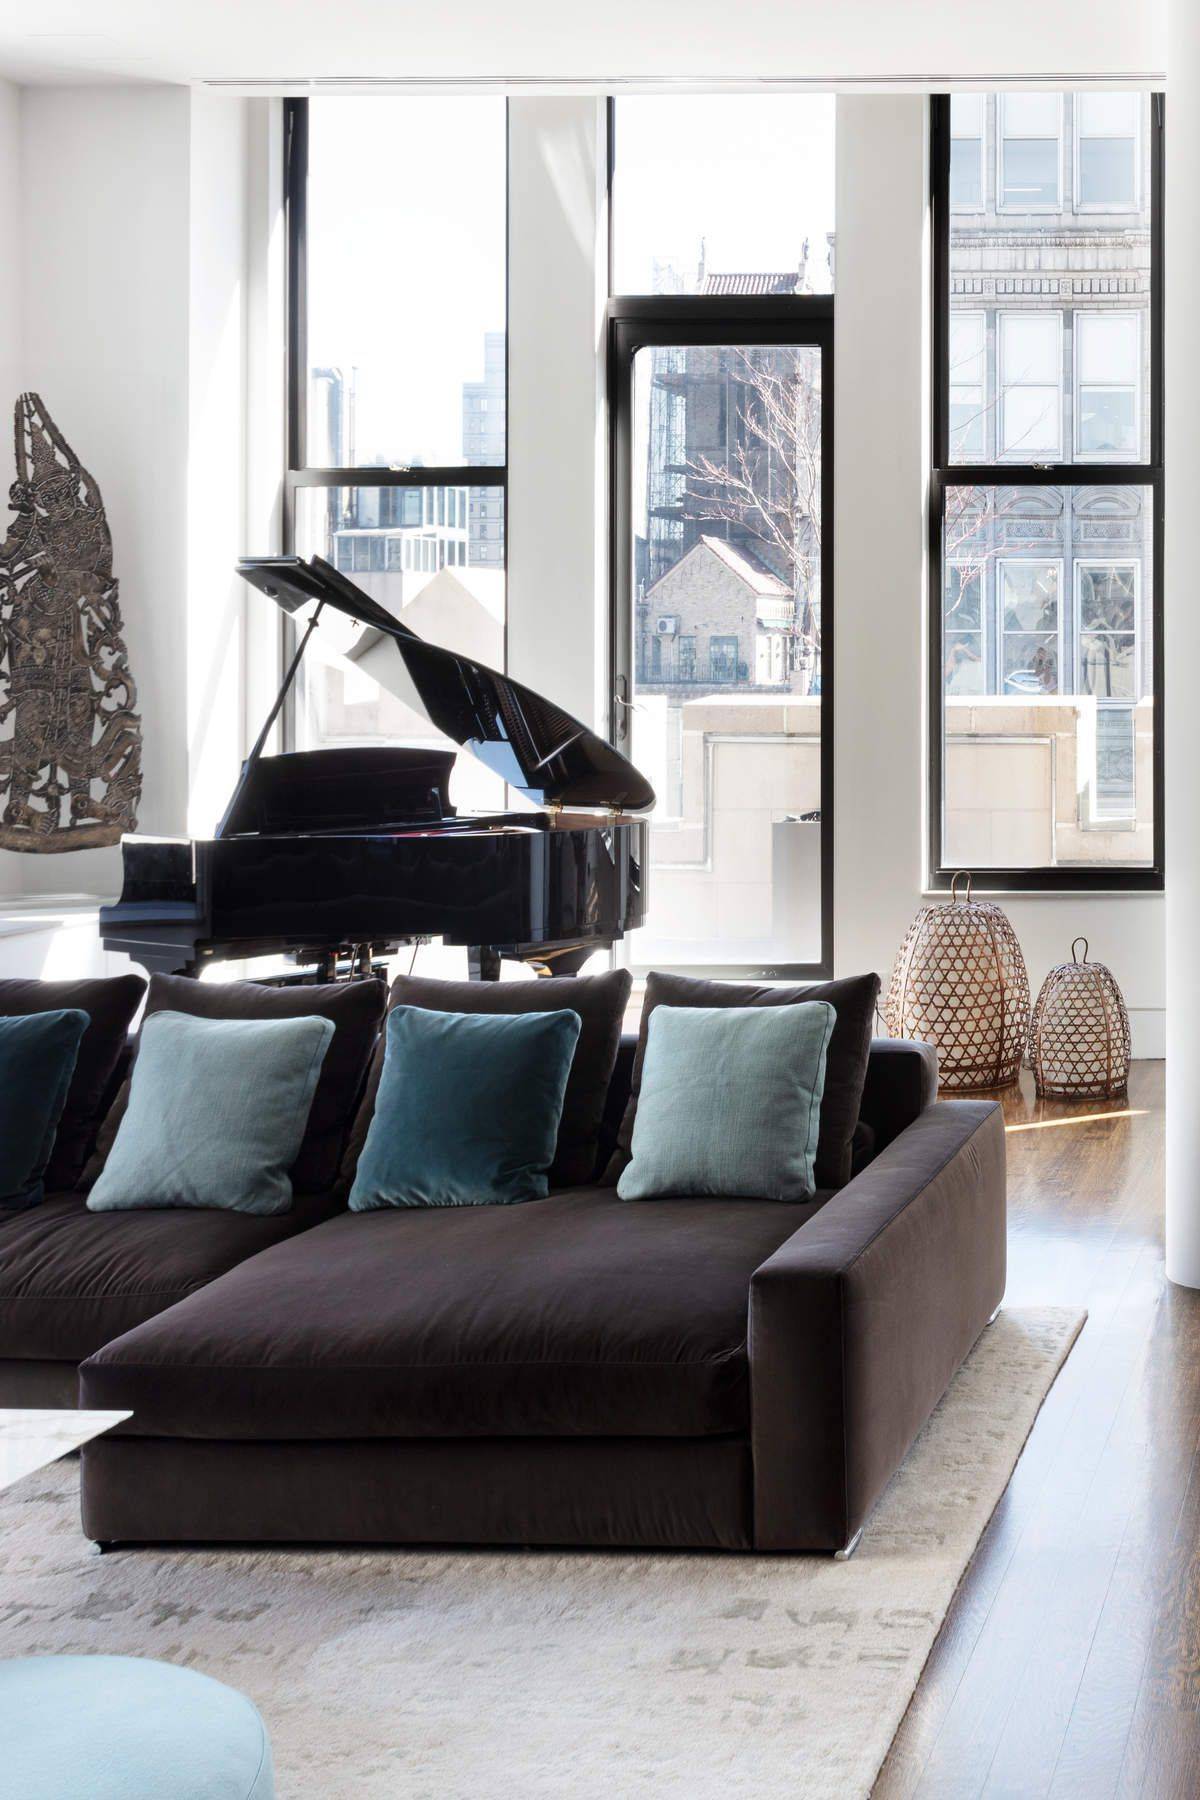 One of New York City's most extraordinary condominium penthouses located in the exciting Flatiron District, this grand loft like space encompasses approximately 4000 sq.